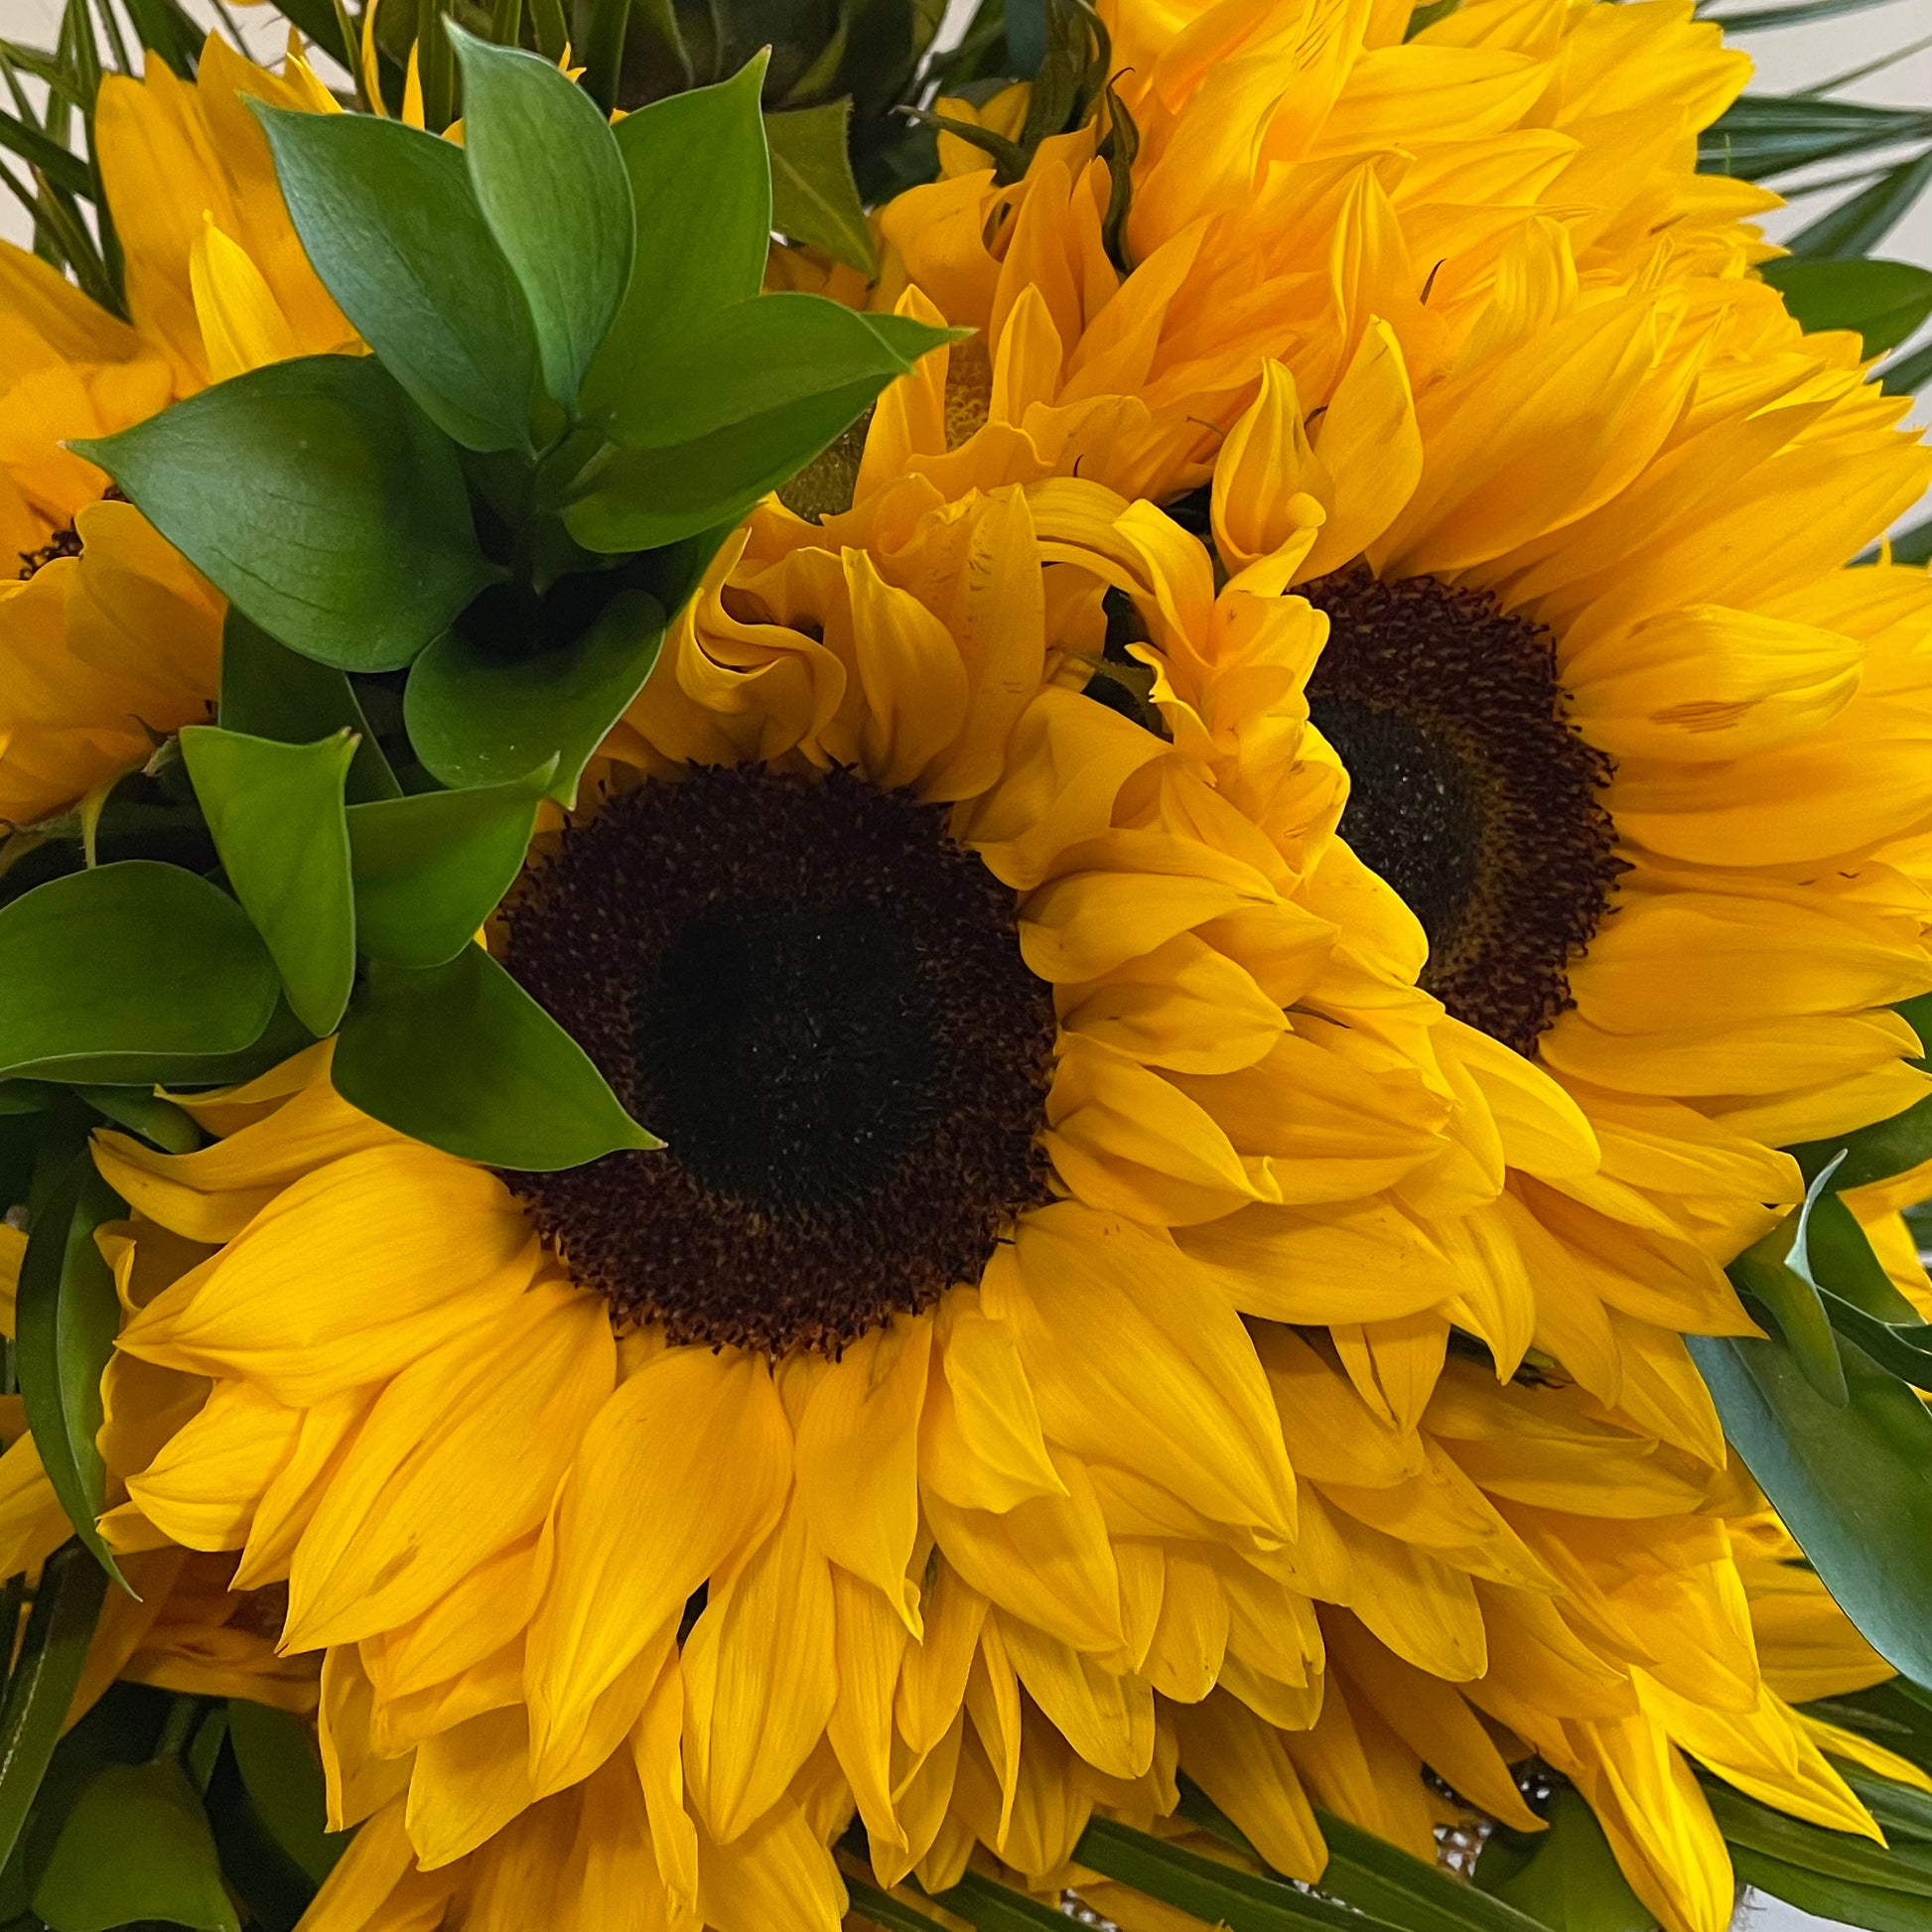 Product image of 'Sunny Day' featuring a collection of sunflowers in a vase